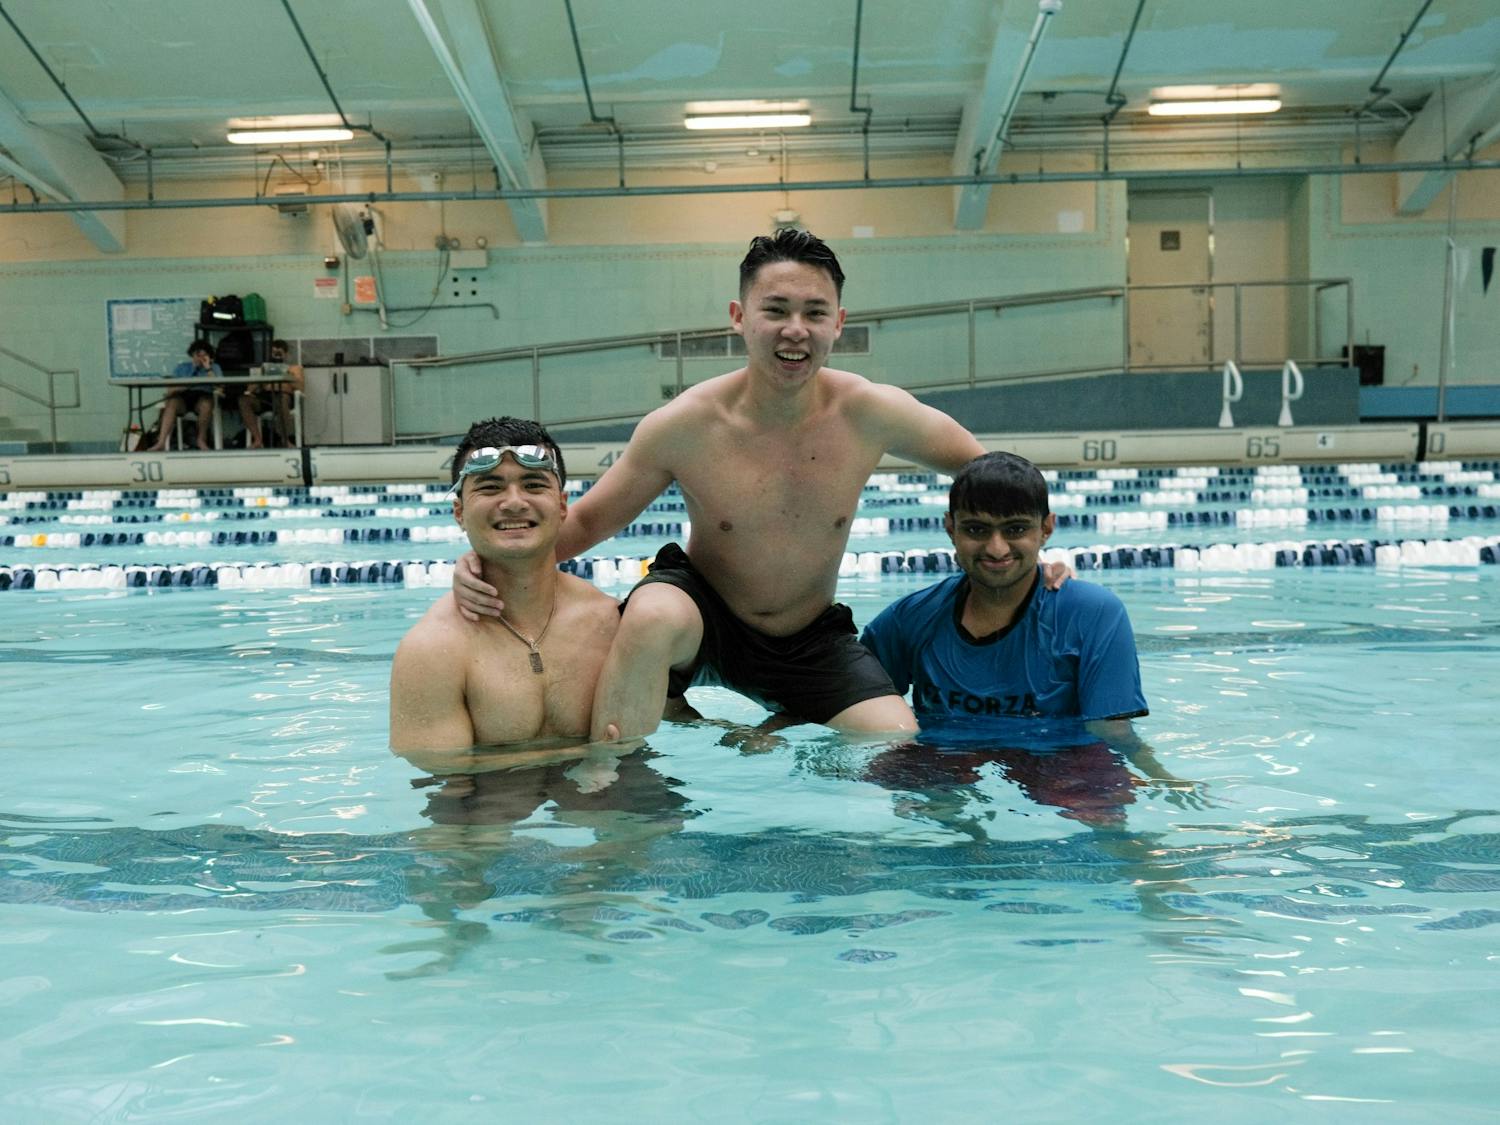 UNC sophomore Duy Pham, junior Duc Anh Huynh, and sophomore Rohan Kalelkar pose for a photo at the FWOC Pool Party at the Bowman Gray Indoor Pool on Wednesday, Jan. 11, 2023.